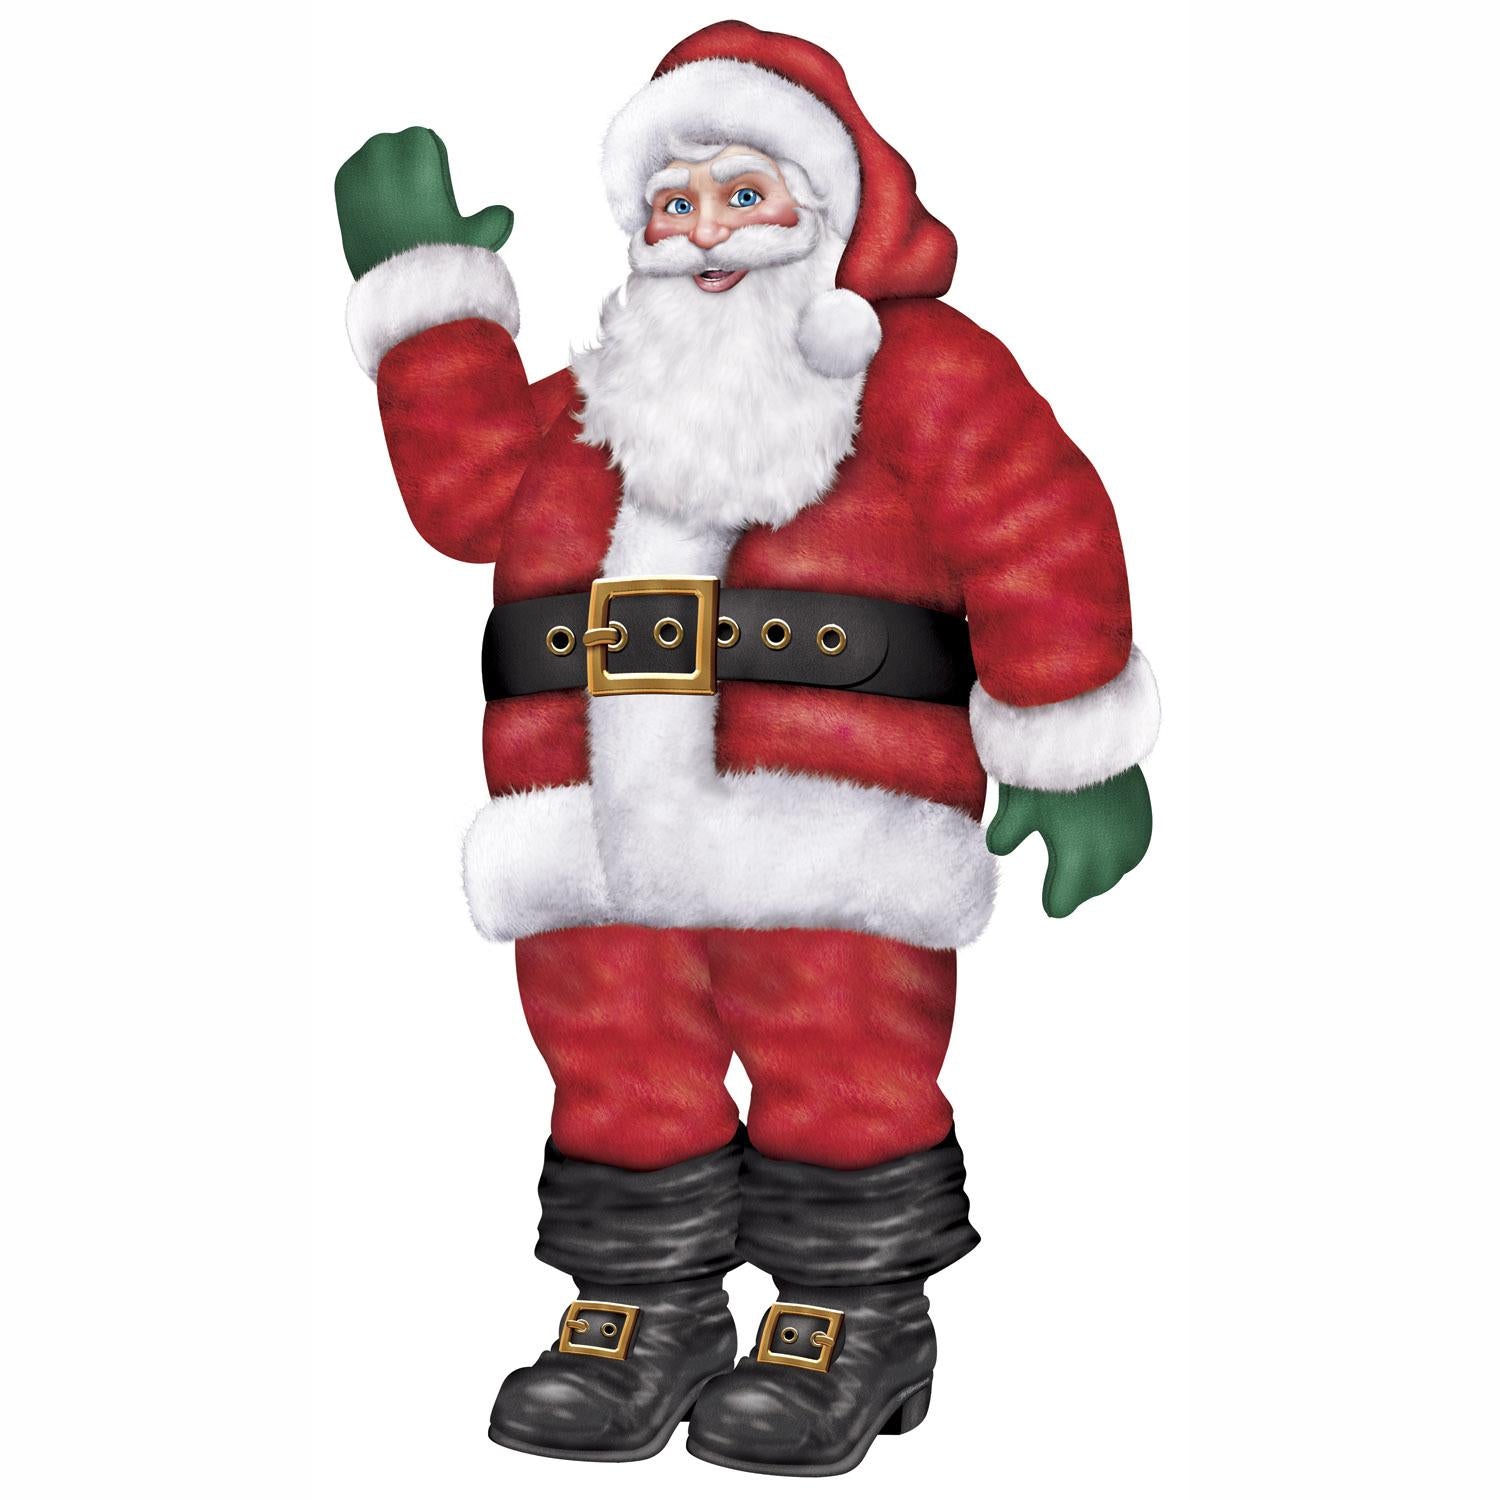 Beistle 66 inch Tall Jointed Santa Christmas Decoration